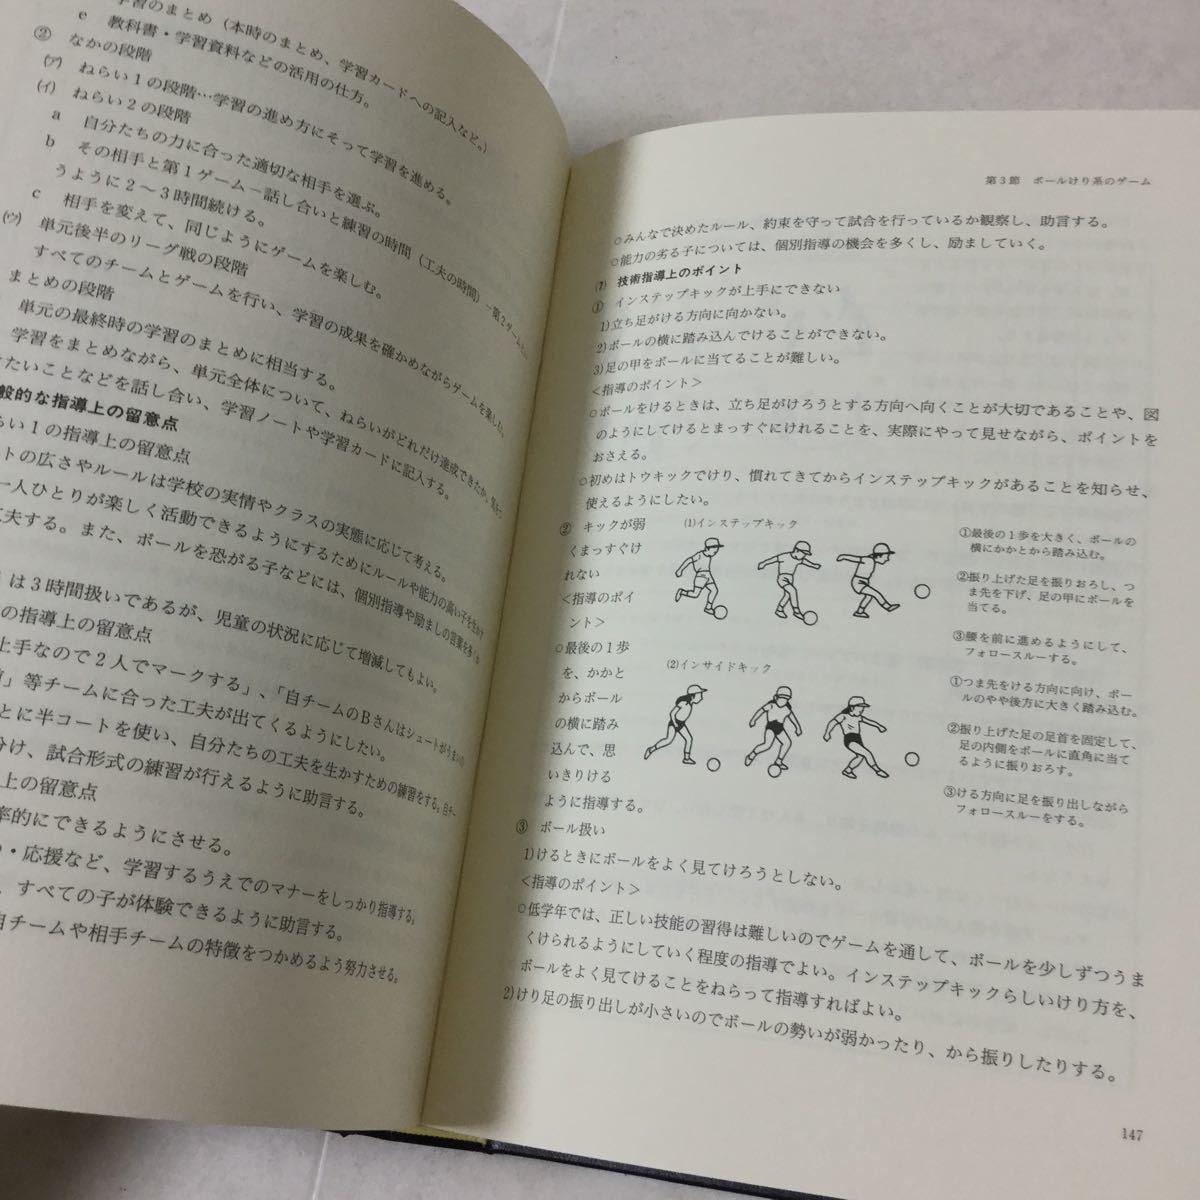 a25 elementary school physical training practice guidance complete set of works 3 game Japan education books center . door .. tree regular book@ elementary school student physical training education gymnastics swim motion . raw textbook study ..